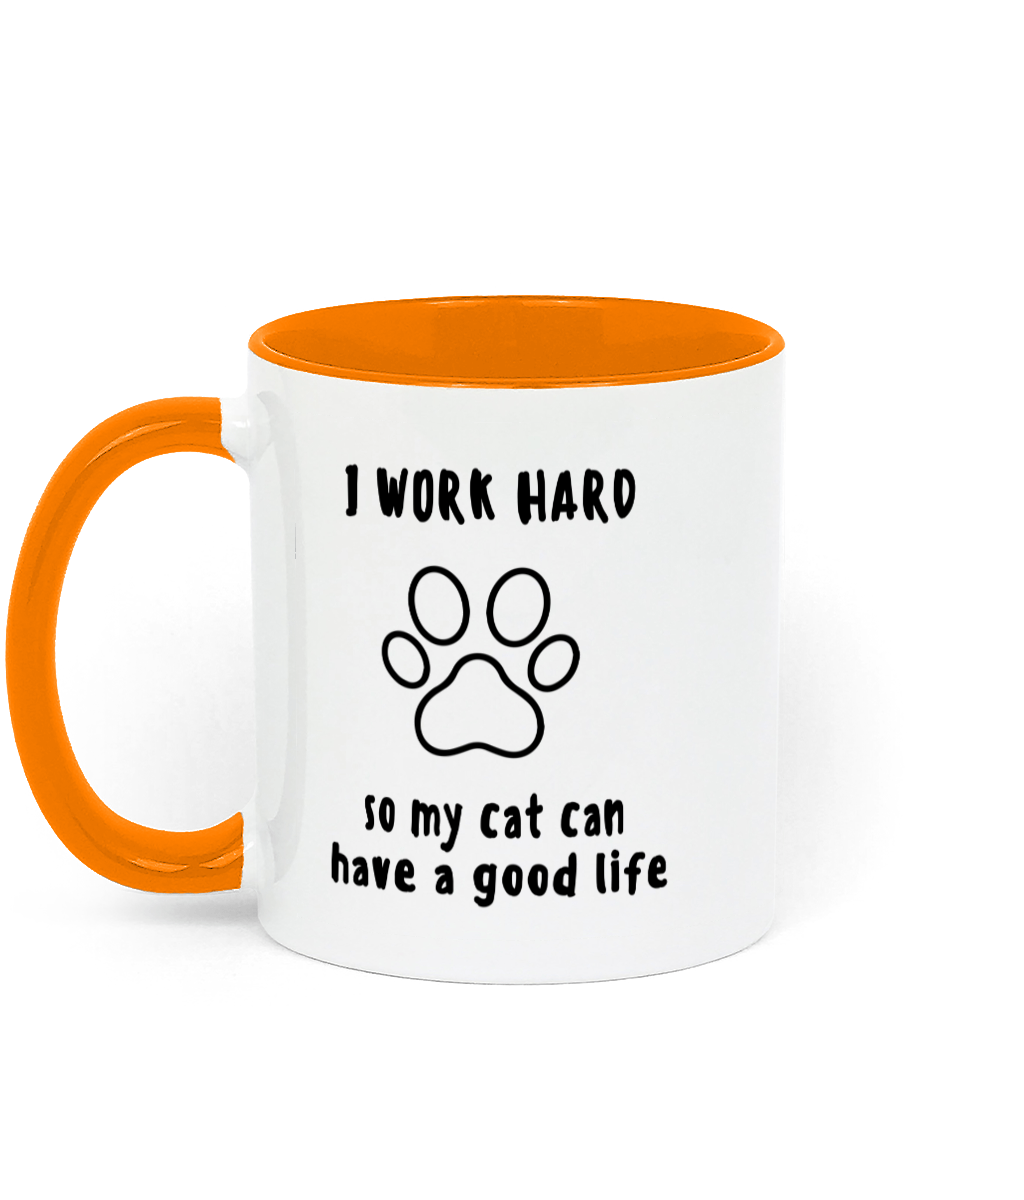 I Work Hard so My Cat Can Have a Good life. 11 oz mug. Cat Lover. Perfect Gift.Two-Toned. Orange.